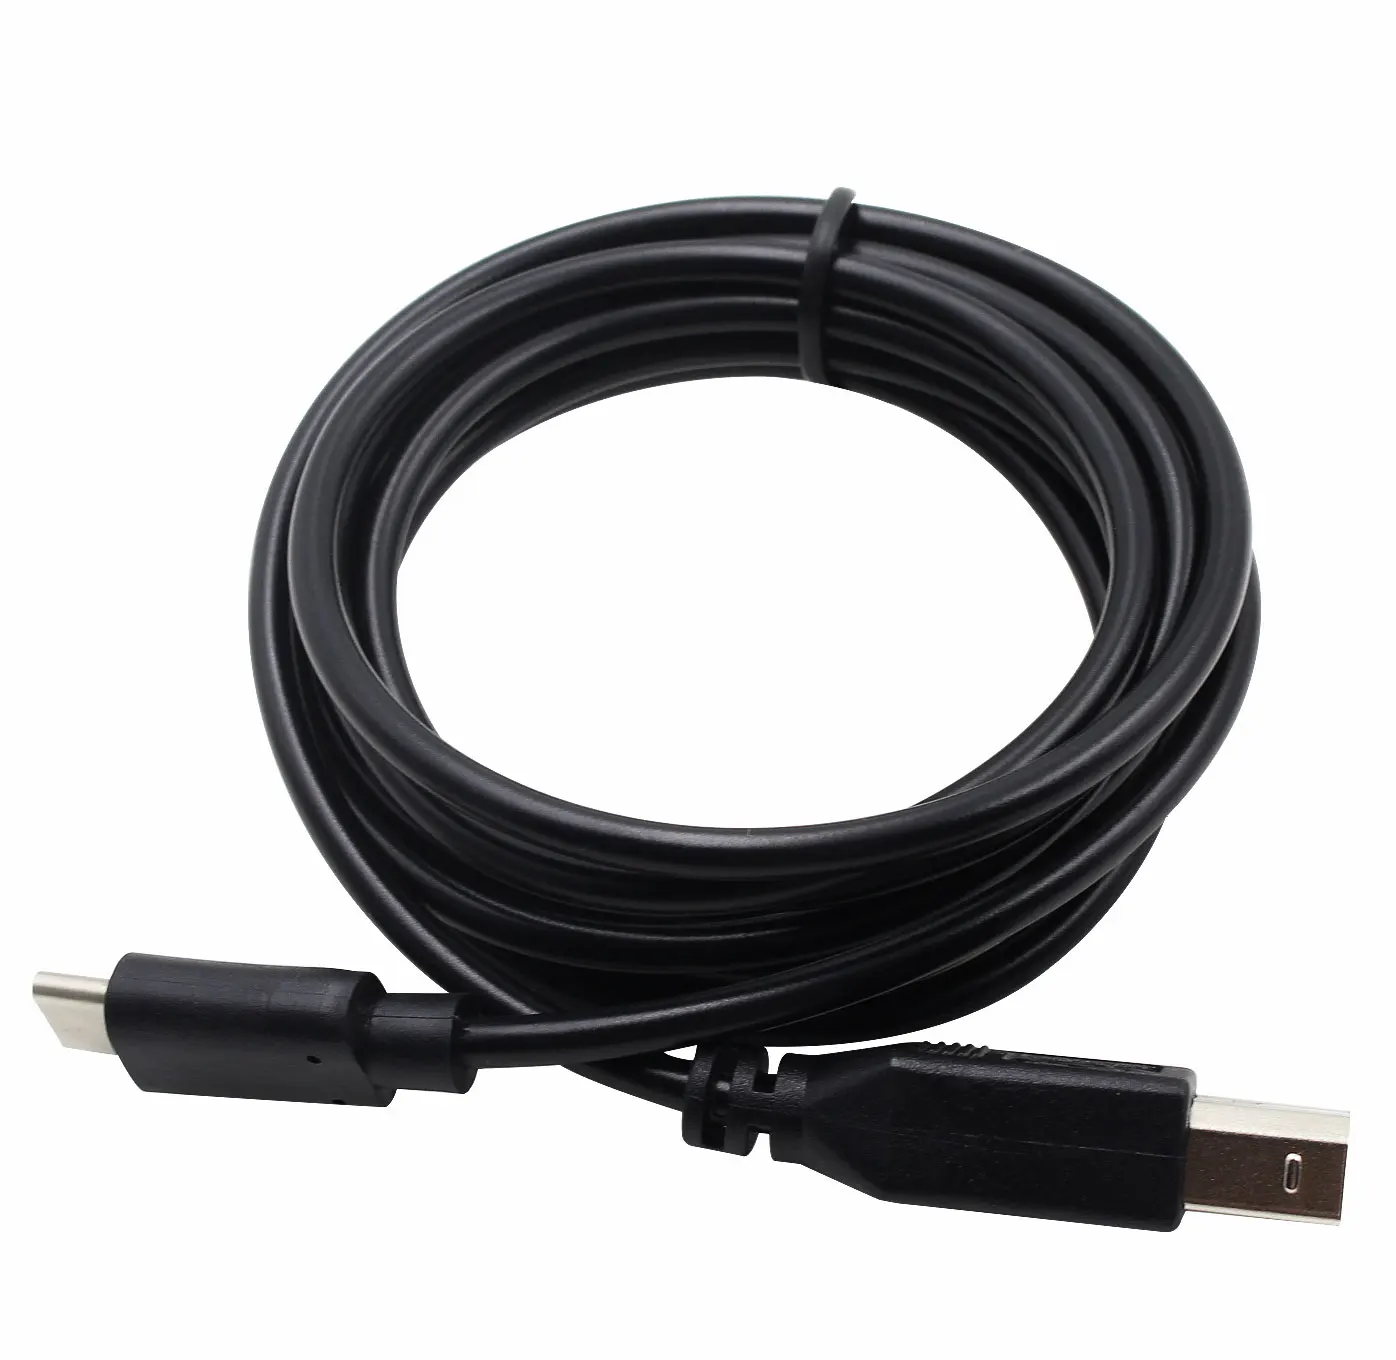 Samarbejde Opdatering foran TYPE C TO USB B CABLE CORD FOR DYMO LabelWriter 4XL 450 Label Printer